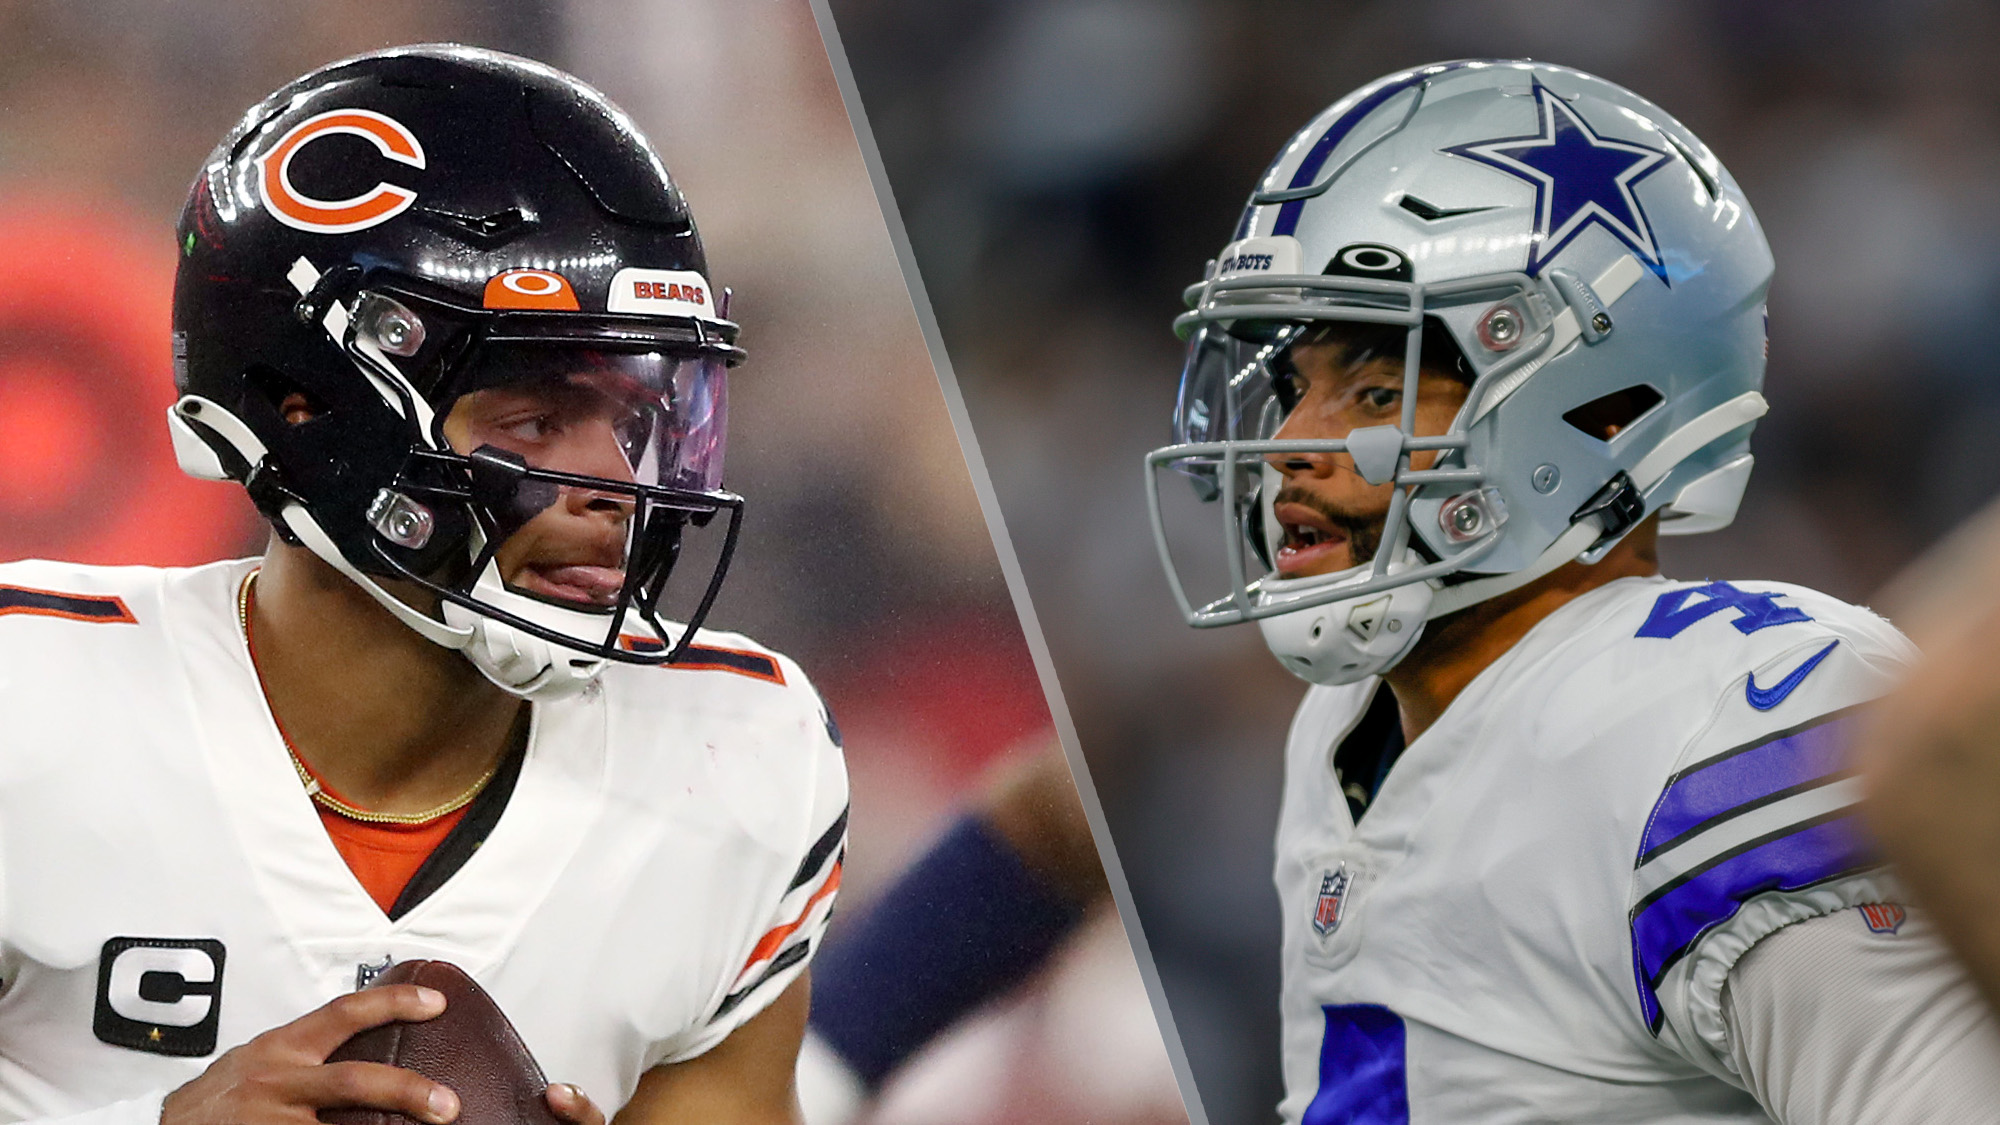 Bears vs Cowboys live stream: How to watch NFL week 8 online today